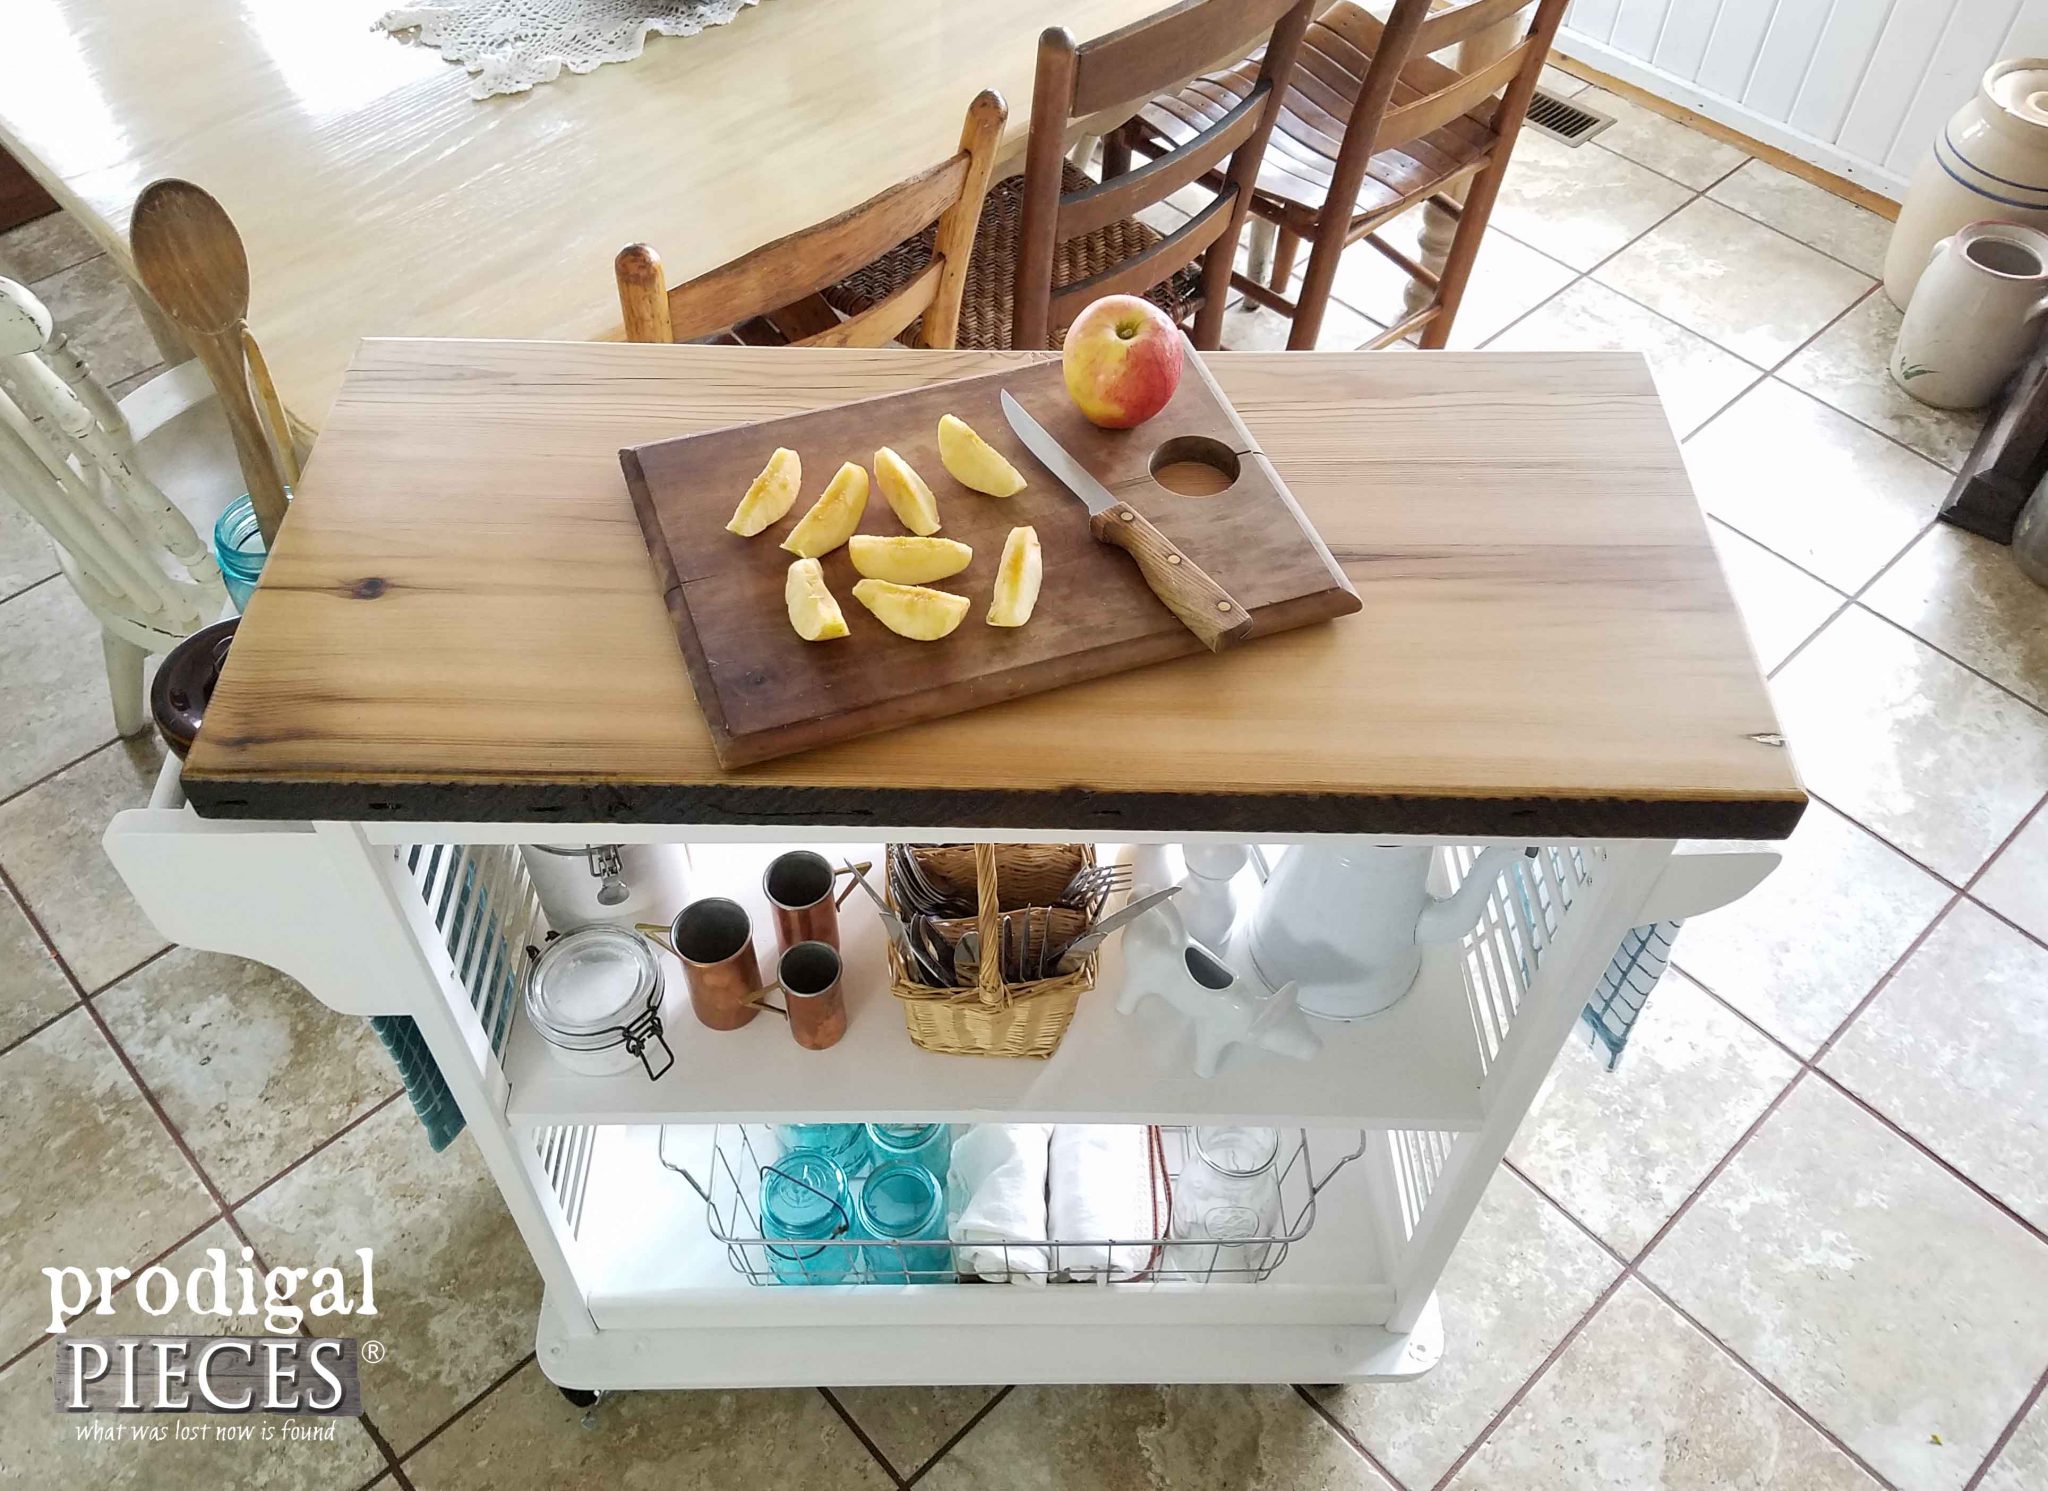 Reclaimed Wood Top on Kitchen Cart by Prodigal Pieces | prodigalpieces.com